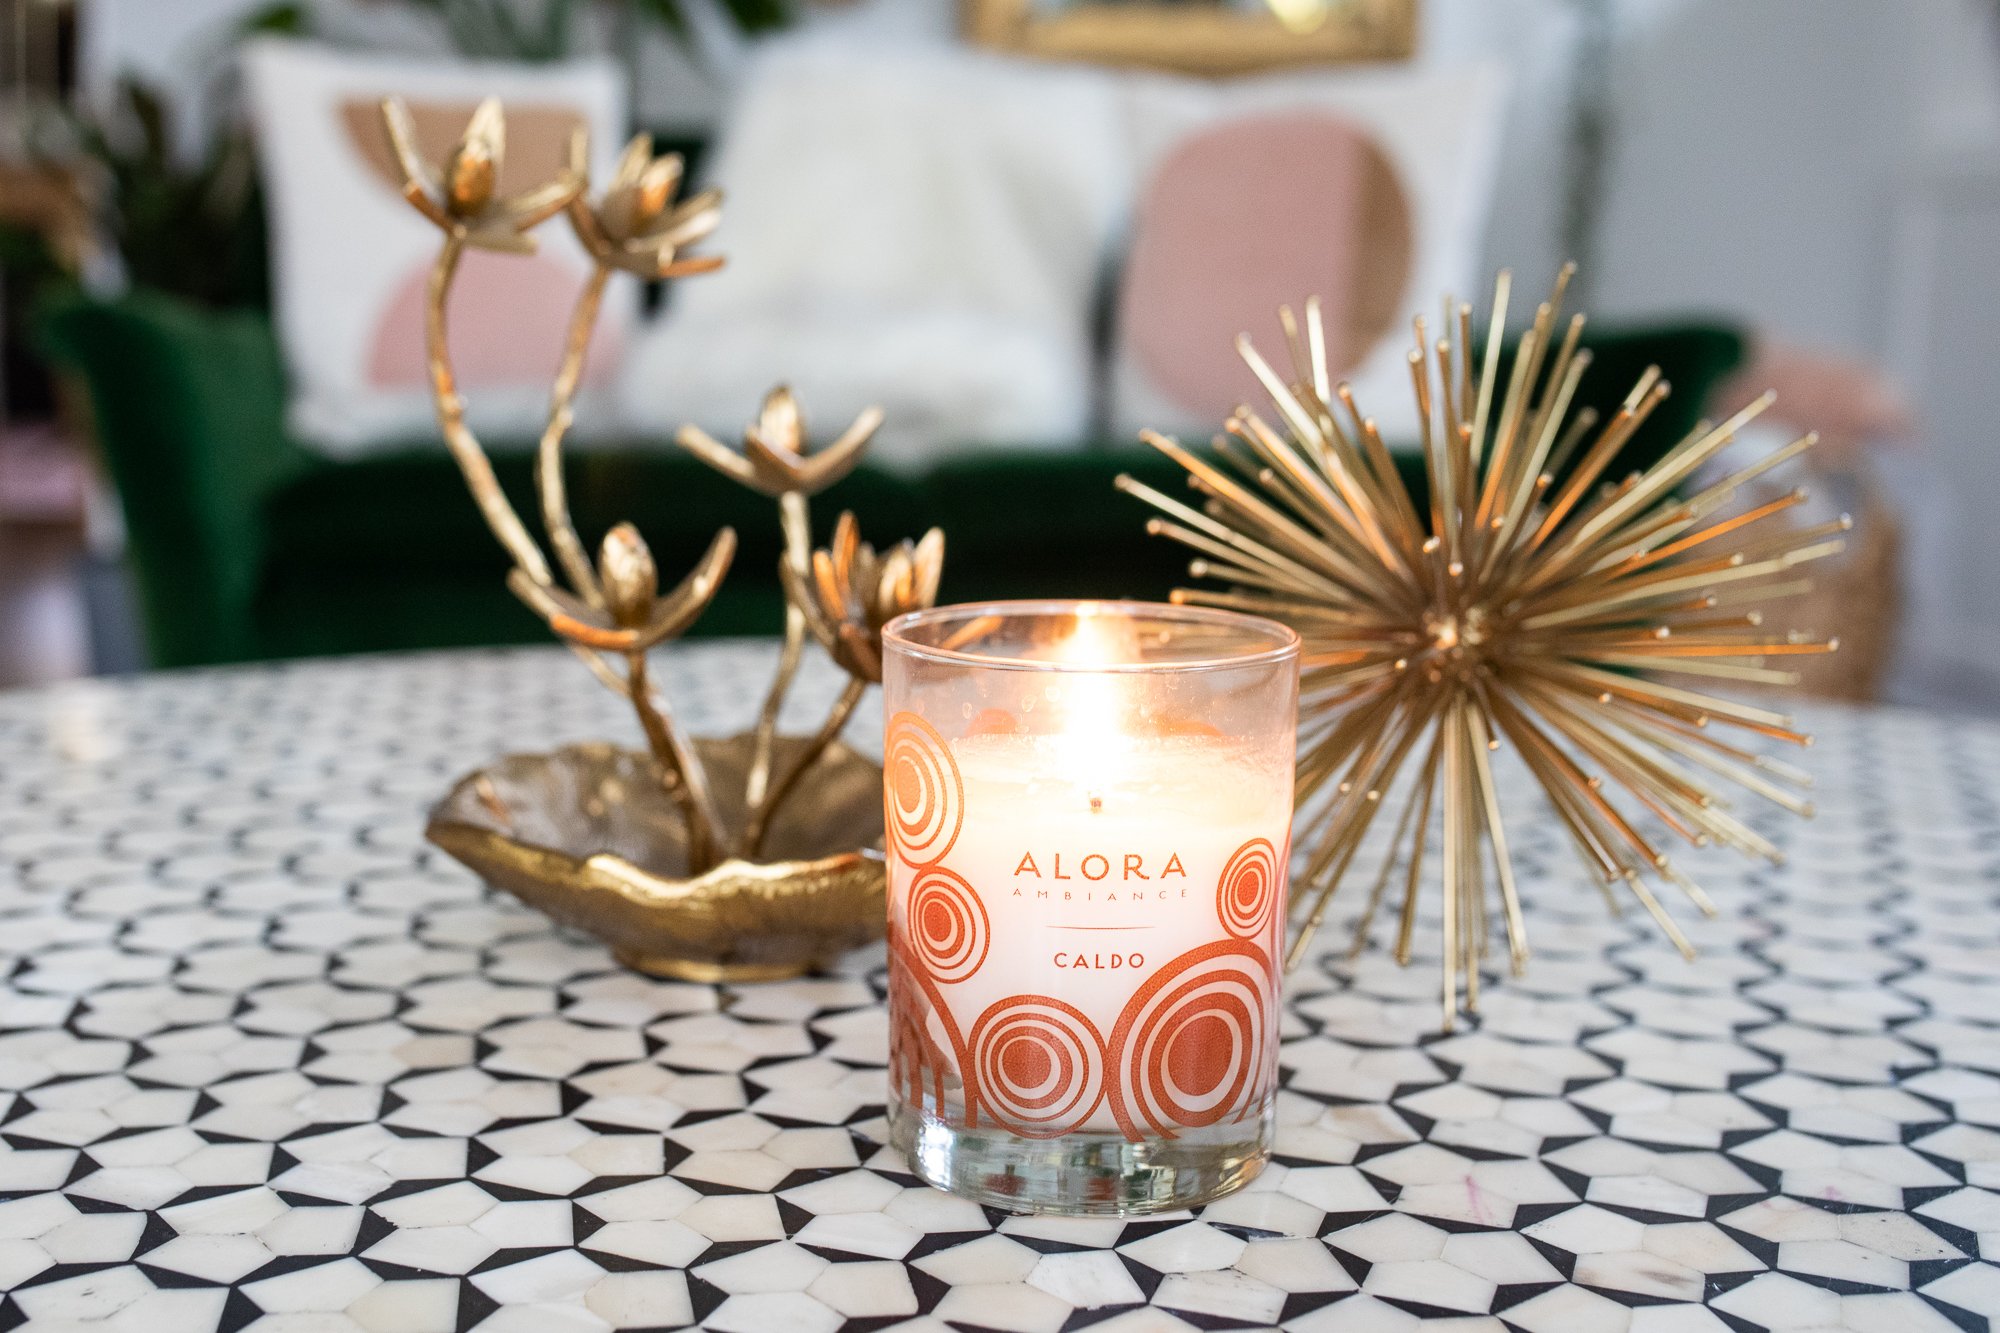 alora ambiance candle on table with gold accents